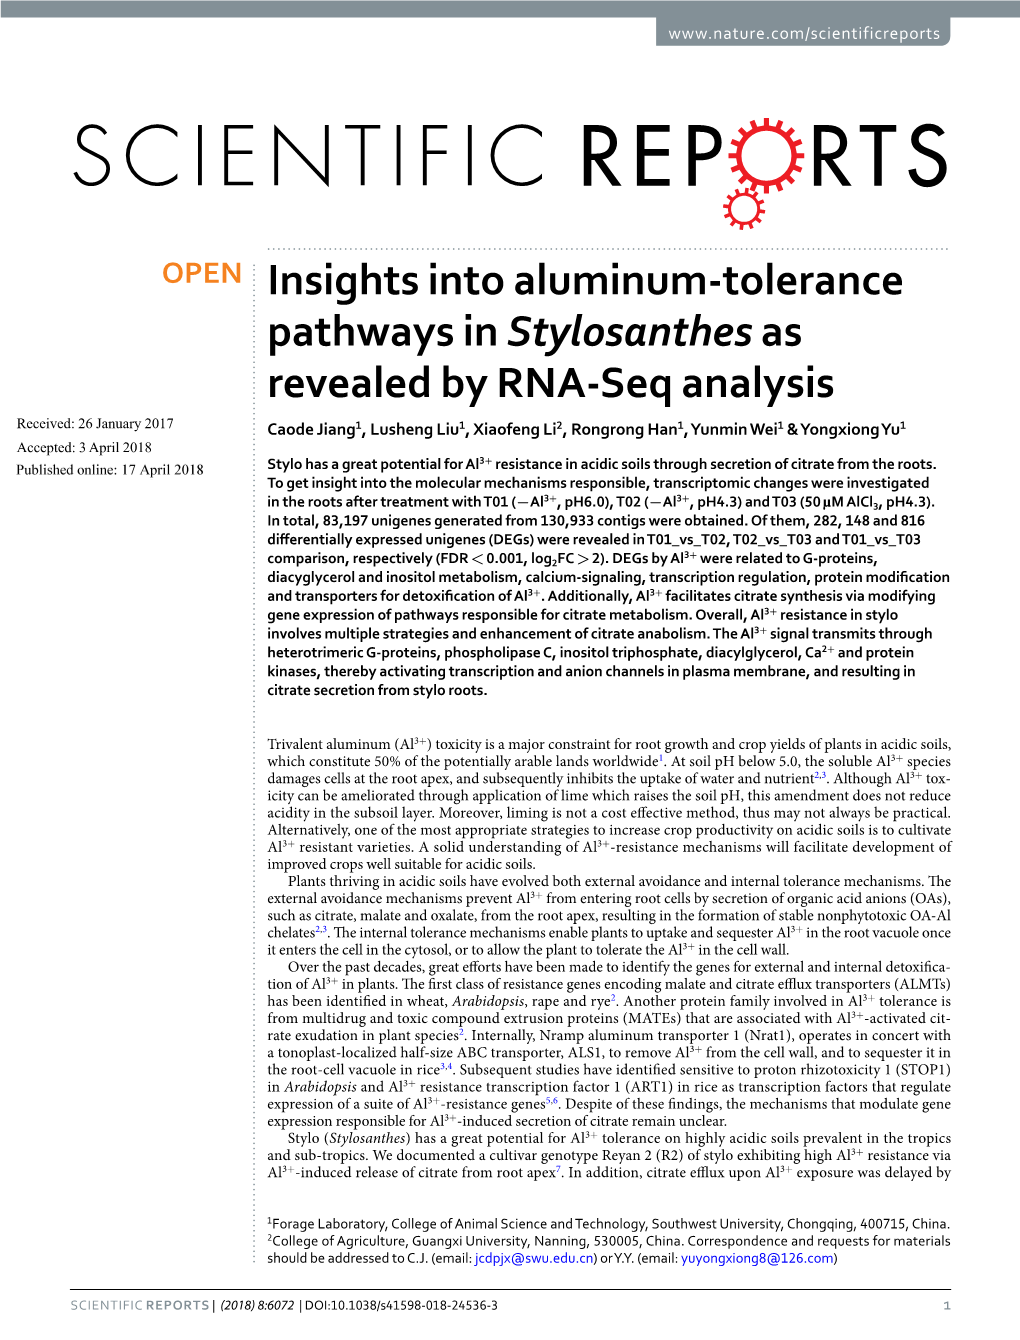 Insights Into Aluminum-Tolerance Pathways in Stylosanthes As